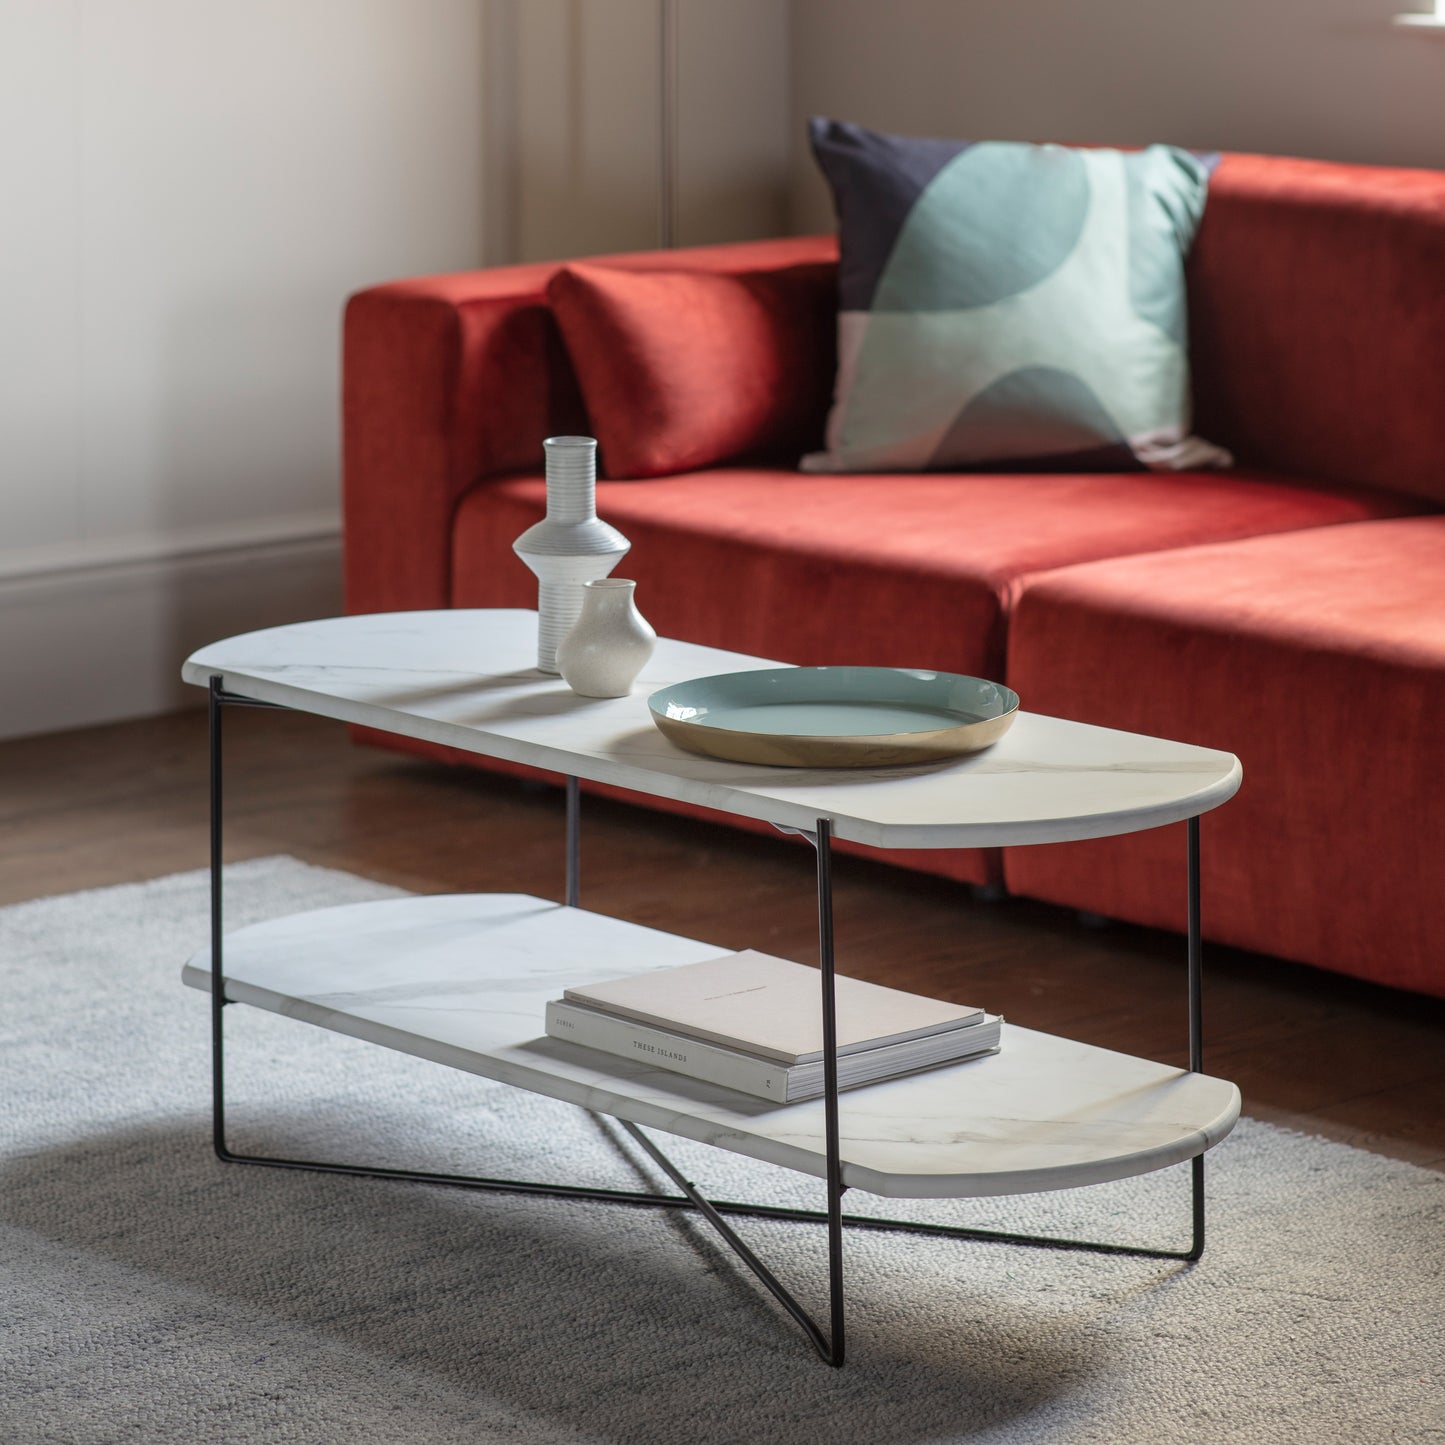 A Linford Display Coffee Table Wht Marble 1100x420x450 with a faux white marble top in a living room with a red couch, available at Kikiathome.co.uk.